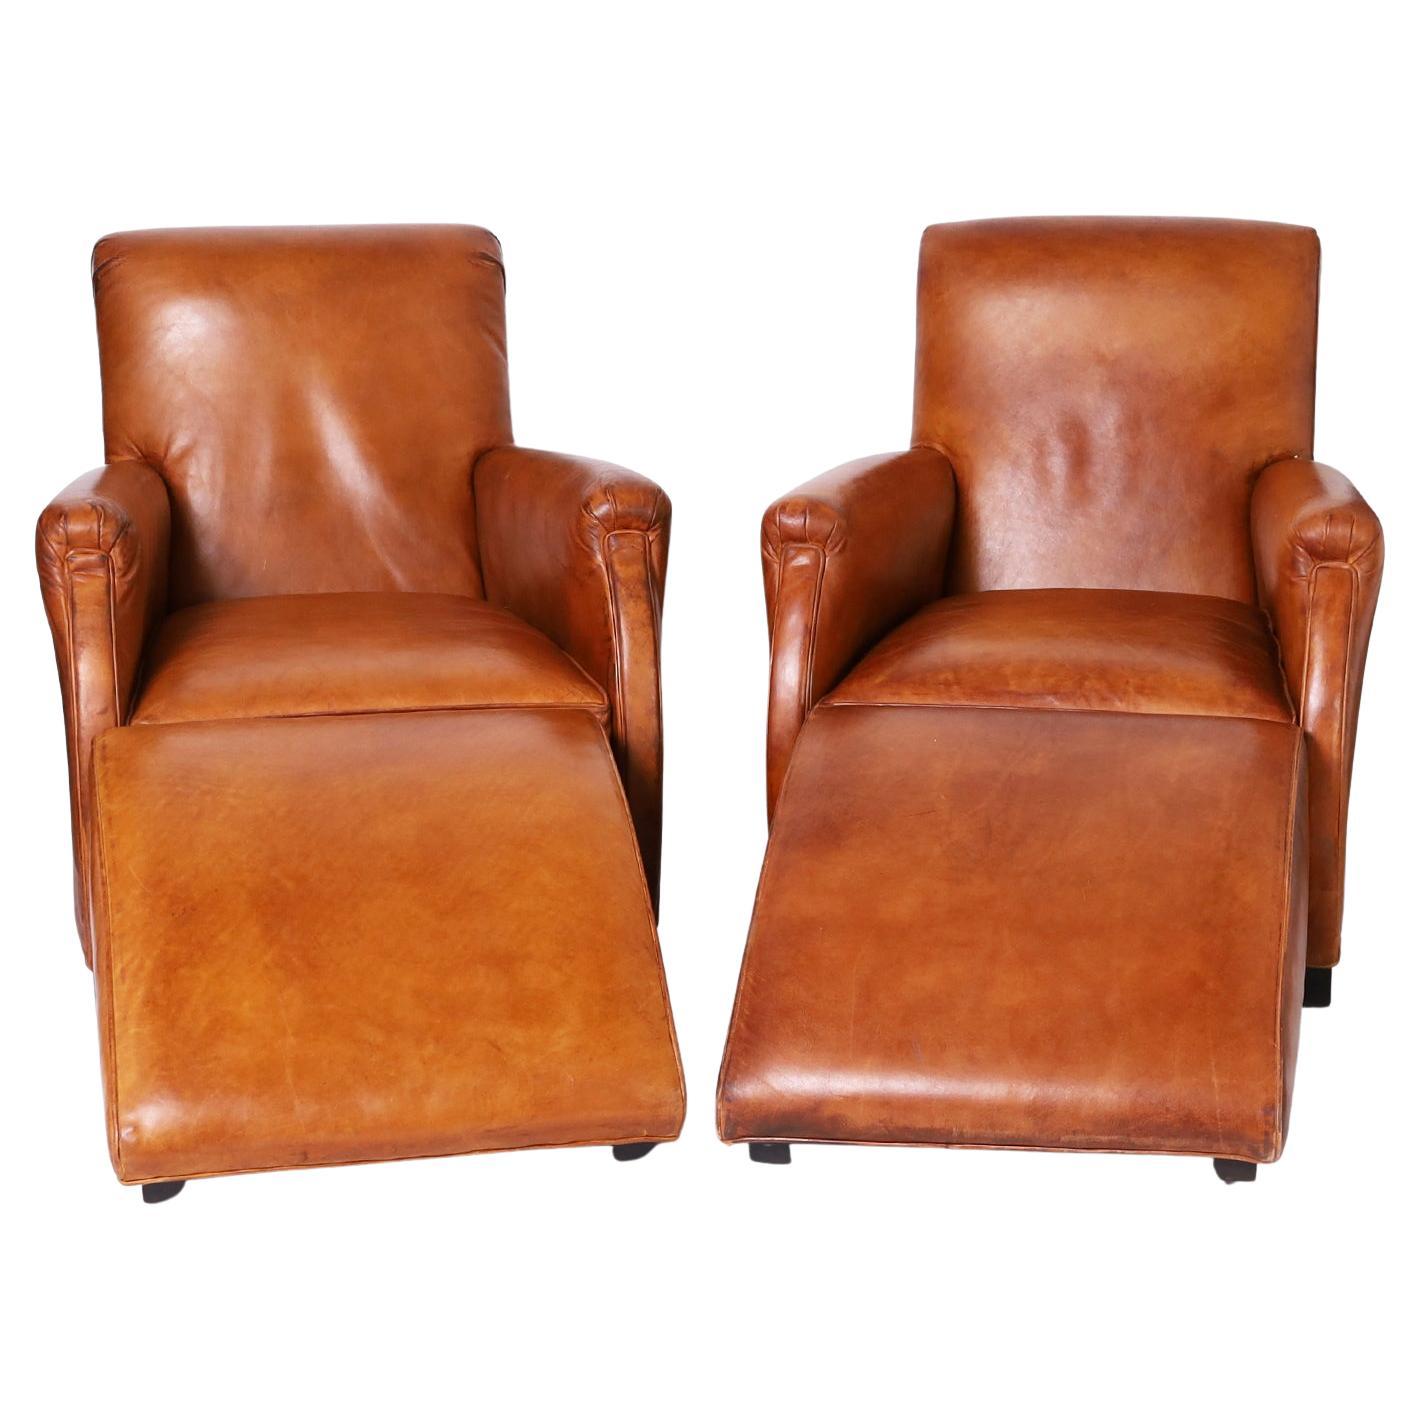 Pair of Leather Art Deco Style Lounge Chairs and Ottomans by William Allen For Sale